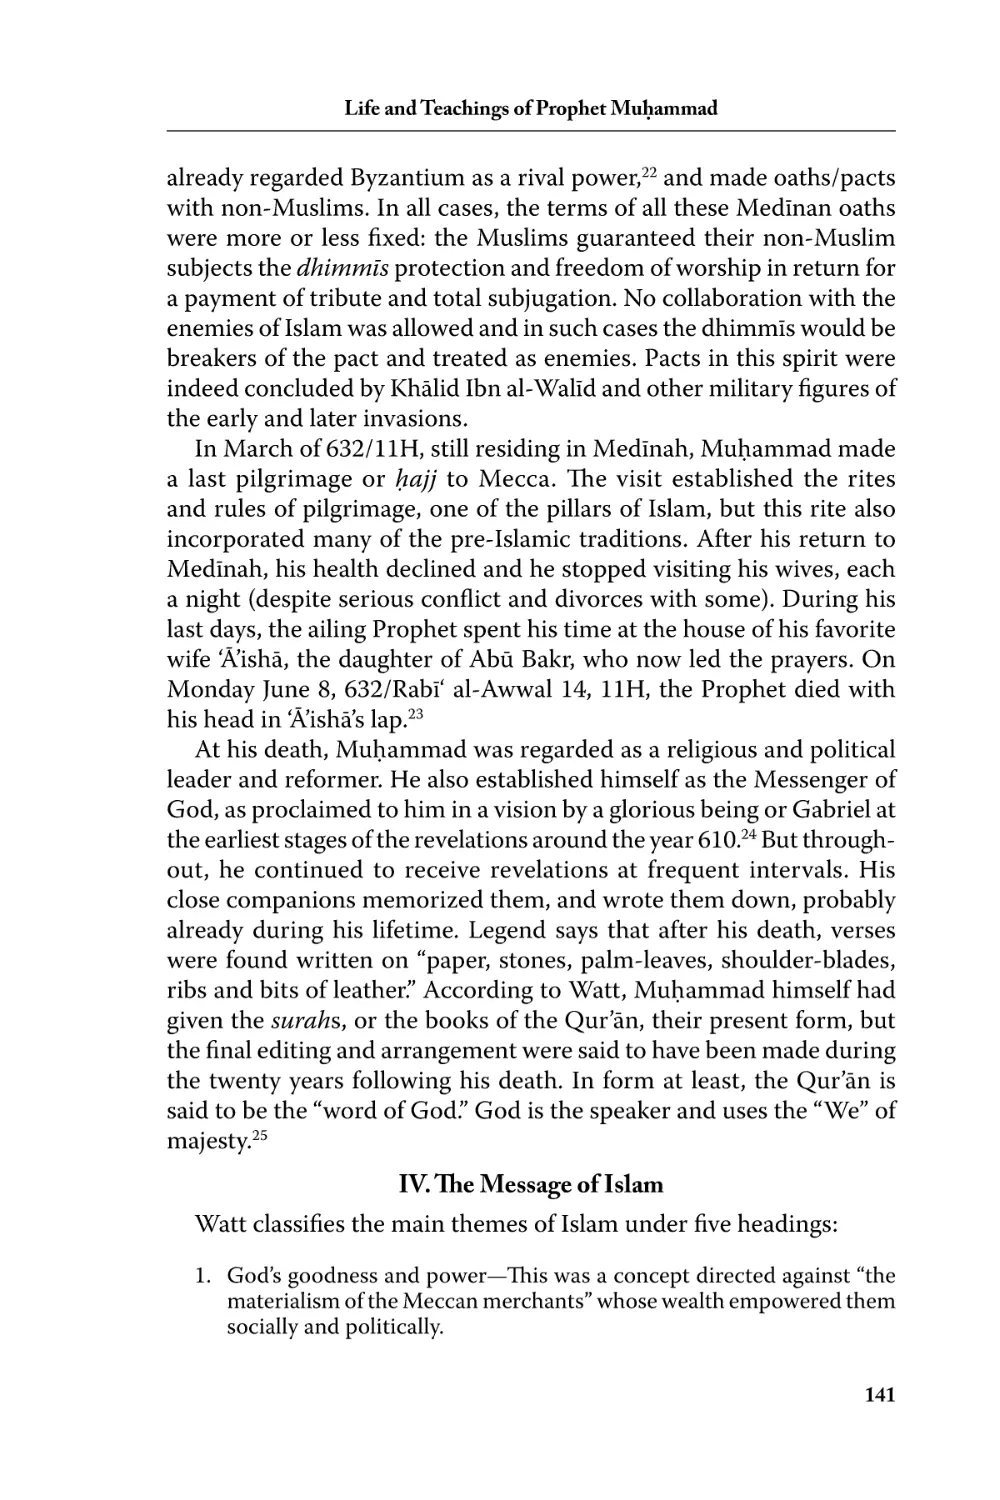 IV. The Message of Islam